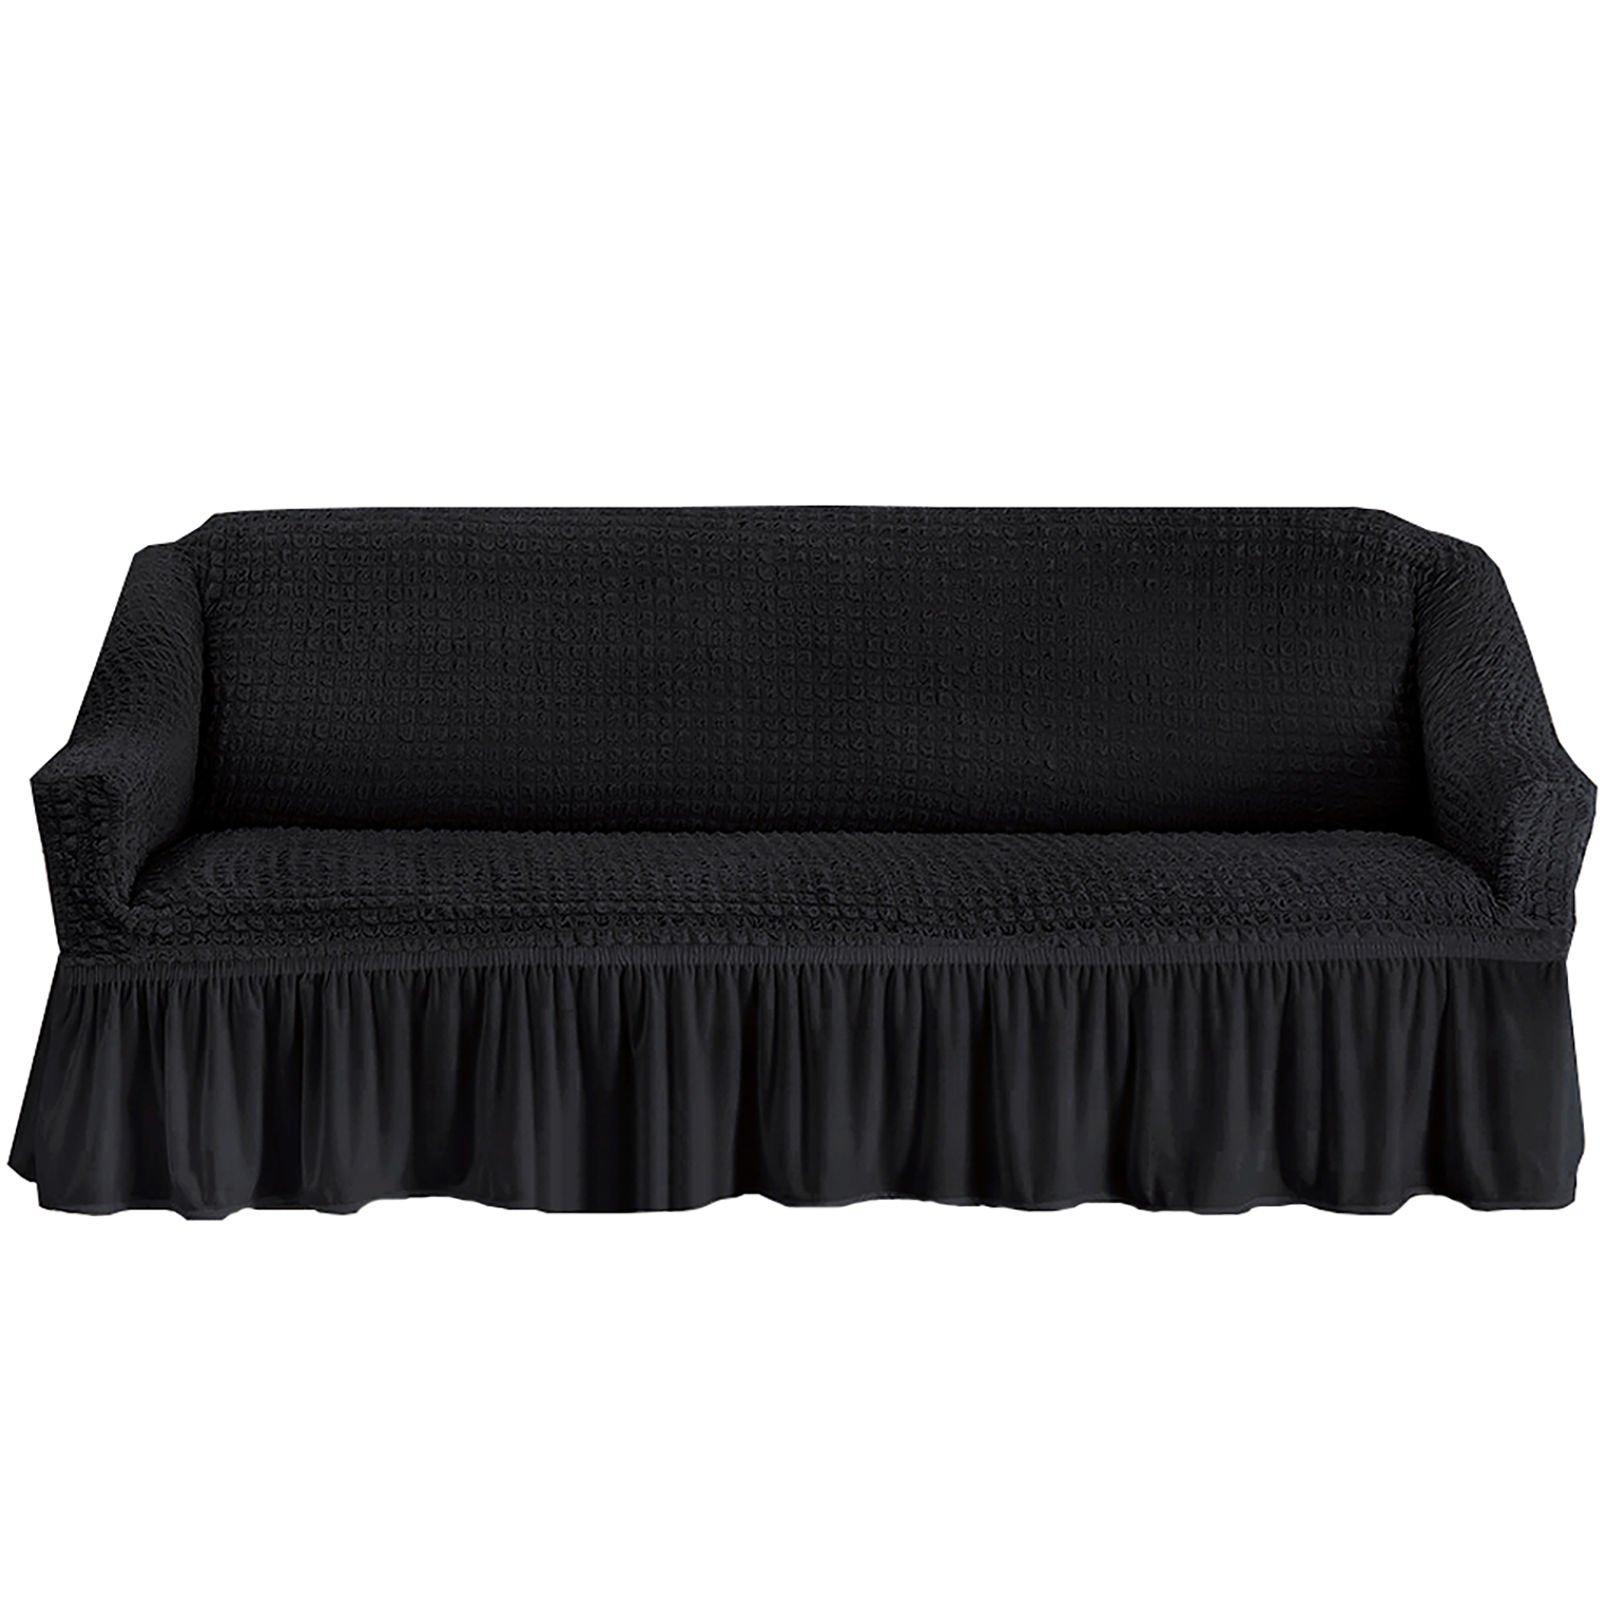 Stretch Sofa Slipcover, 3 Seater Sofa Slipcovers With Skirt With Armless Soft Sofa Cover Elastic Straps Sofa Slipcover For Living Room Kids Pets-black-X-Large